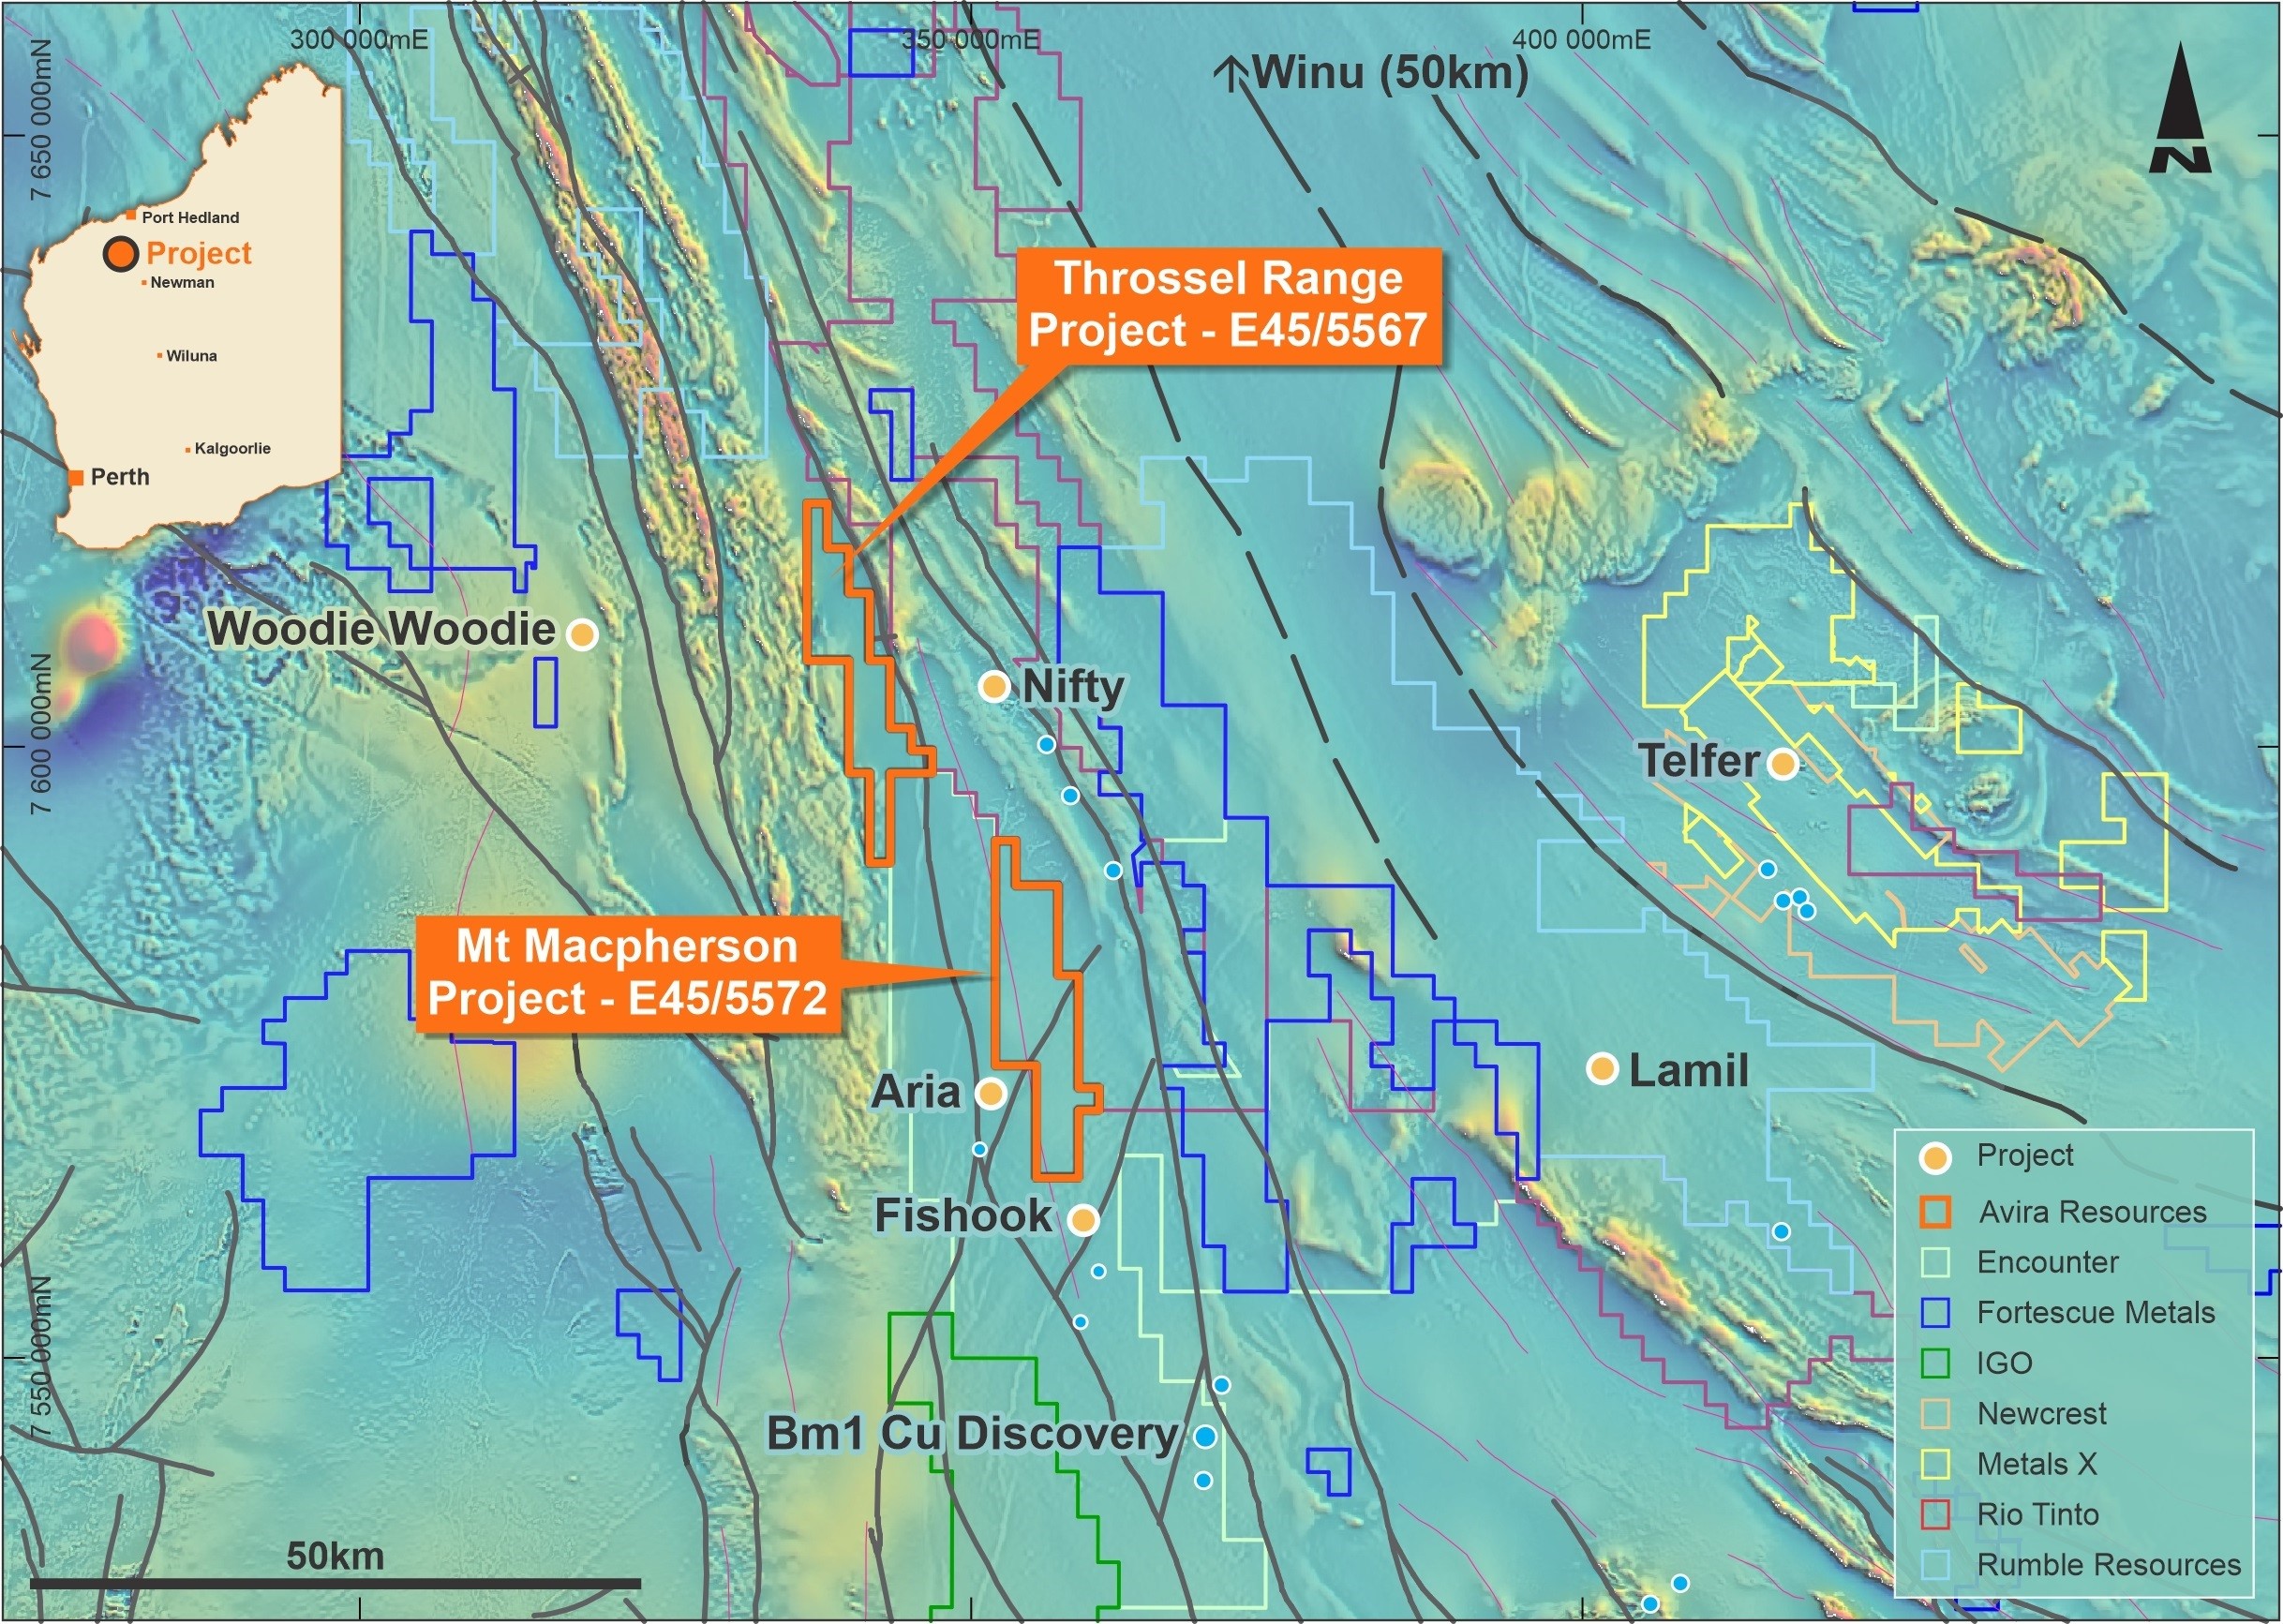 Location of Avira’s Paterson Projects in relation to major mines and emerging copper-gold prospects